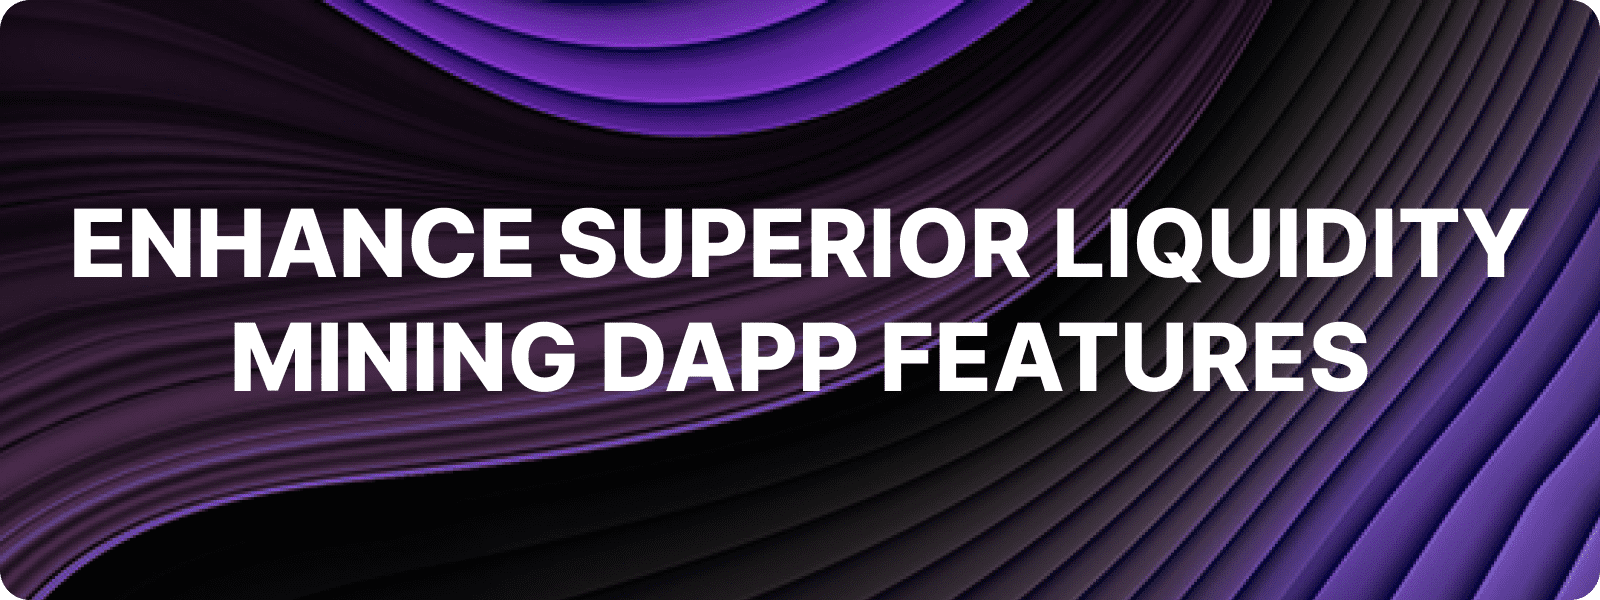 Enhance Superior Liquidity Mining DApp Development When you're looking to create a Liquidity Mining DApp, expanding its features is essential to make it more appealing to users and add greater value.